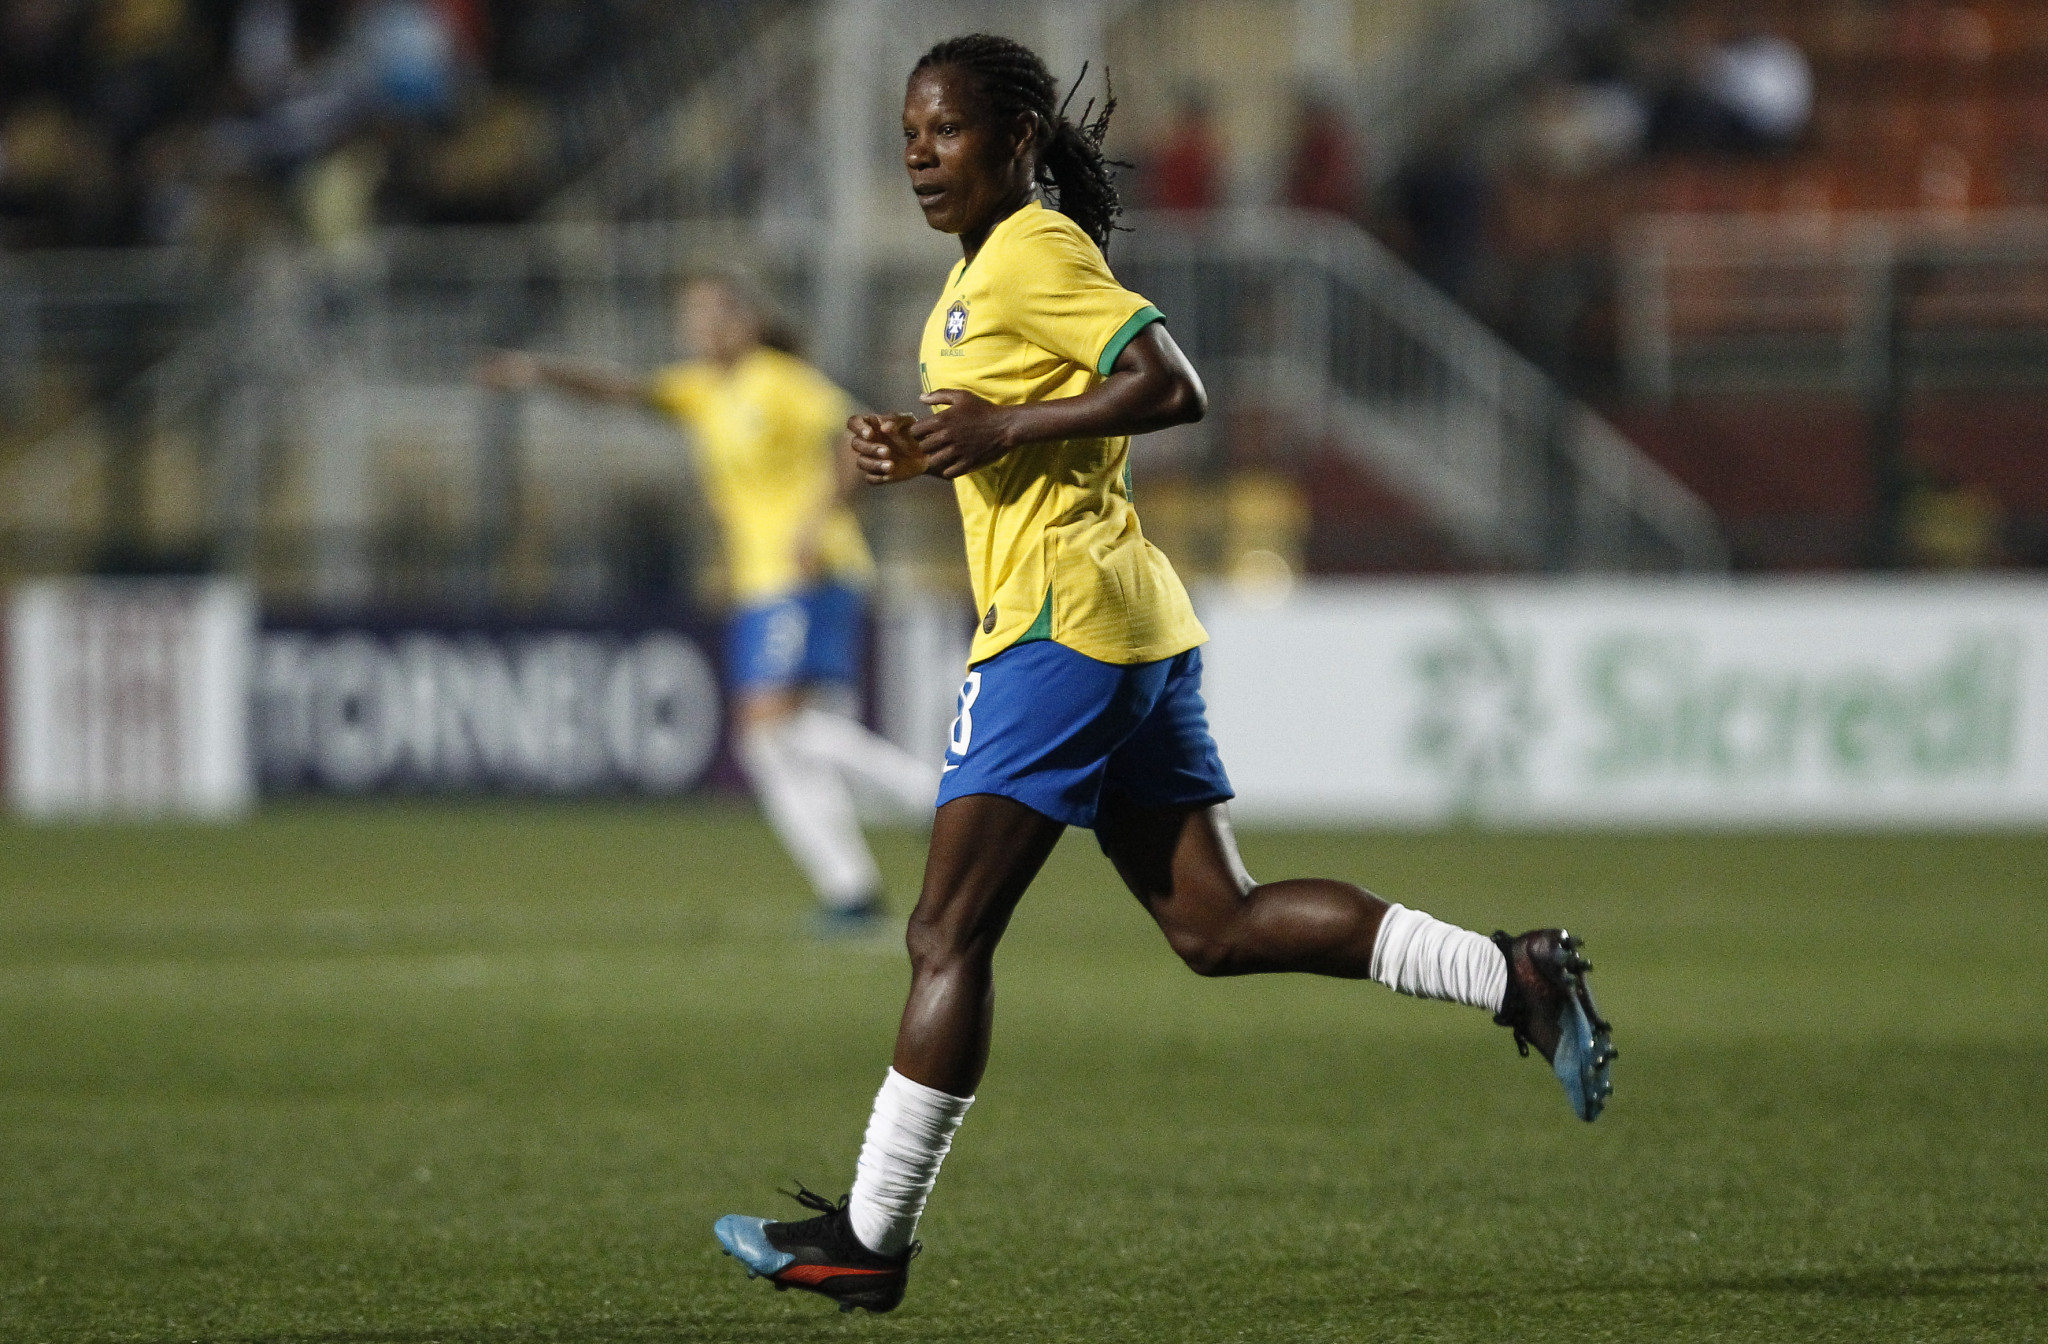 Footballing veteran Formiga is aiming to end her career at her seventh Olympic Games in Tokyo next year ©Getty Images